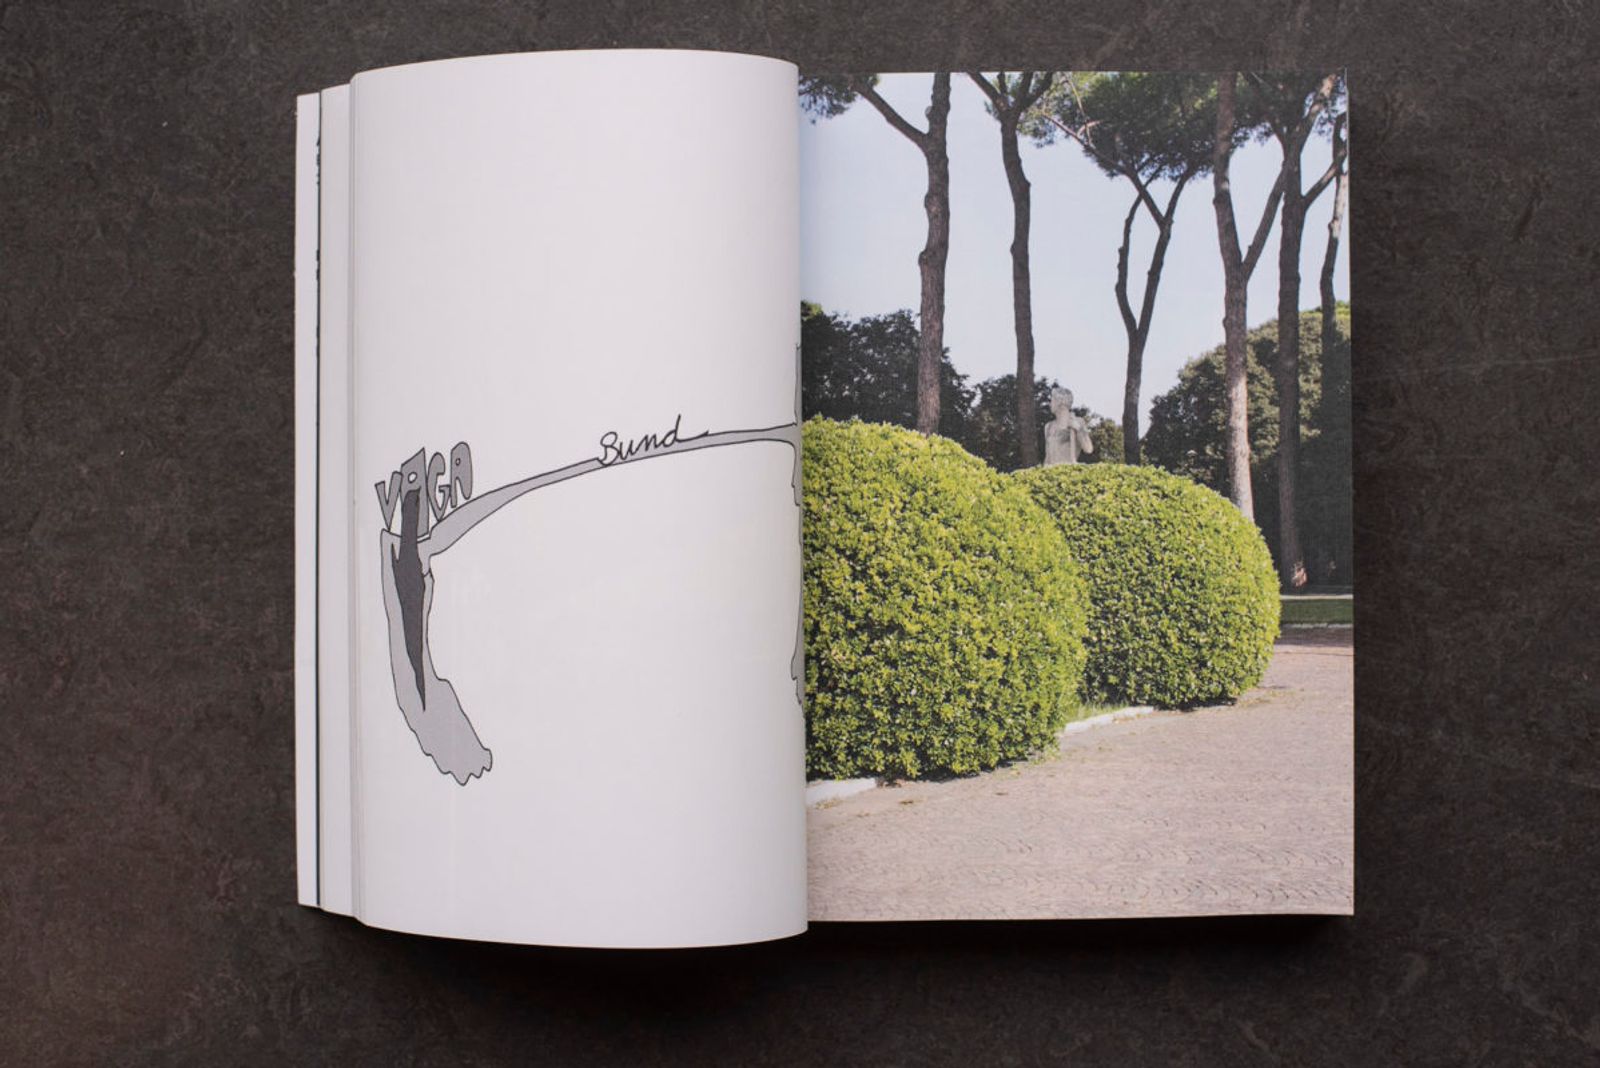 © Leporello Books - Image from the ATLAS OF SCULPTURAL SITUATIONS I–V by Erik Göngrich photography project